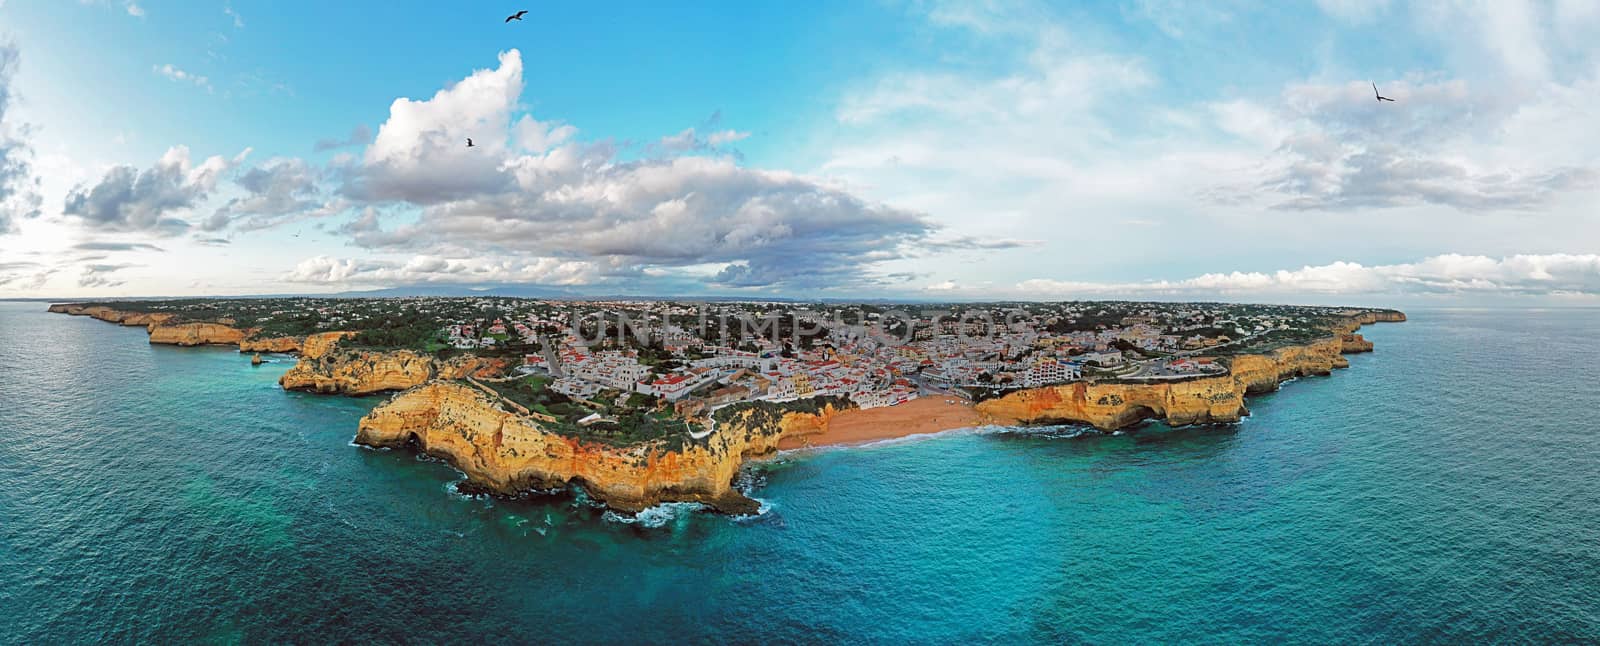 Aerial panorama from the village Carvoeiro in the Algarve Portug by devy